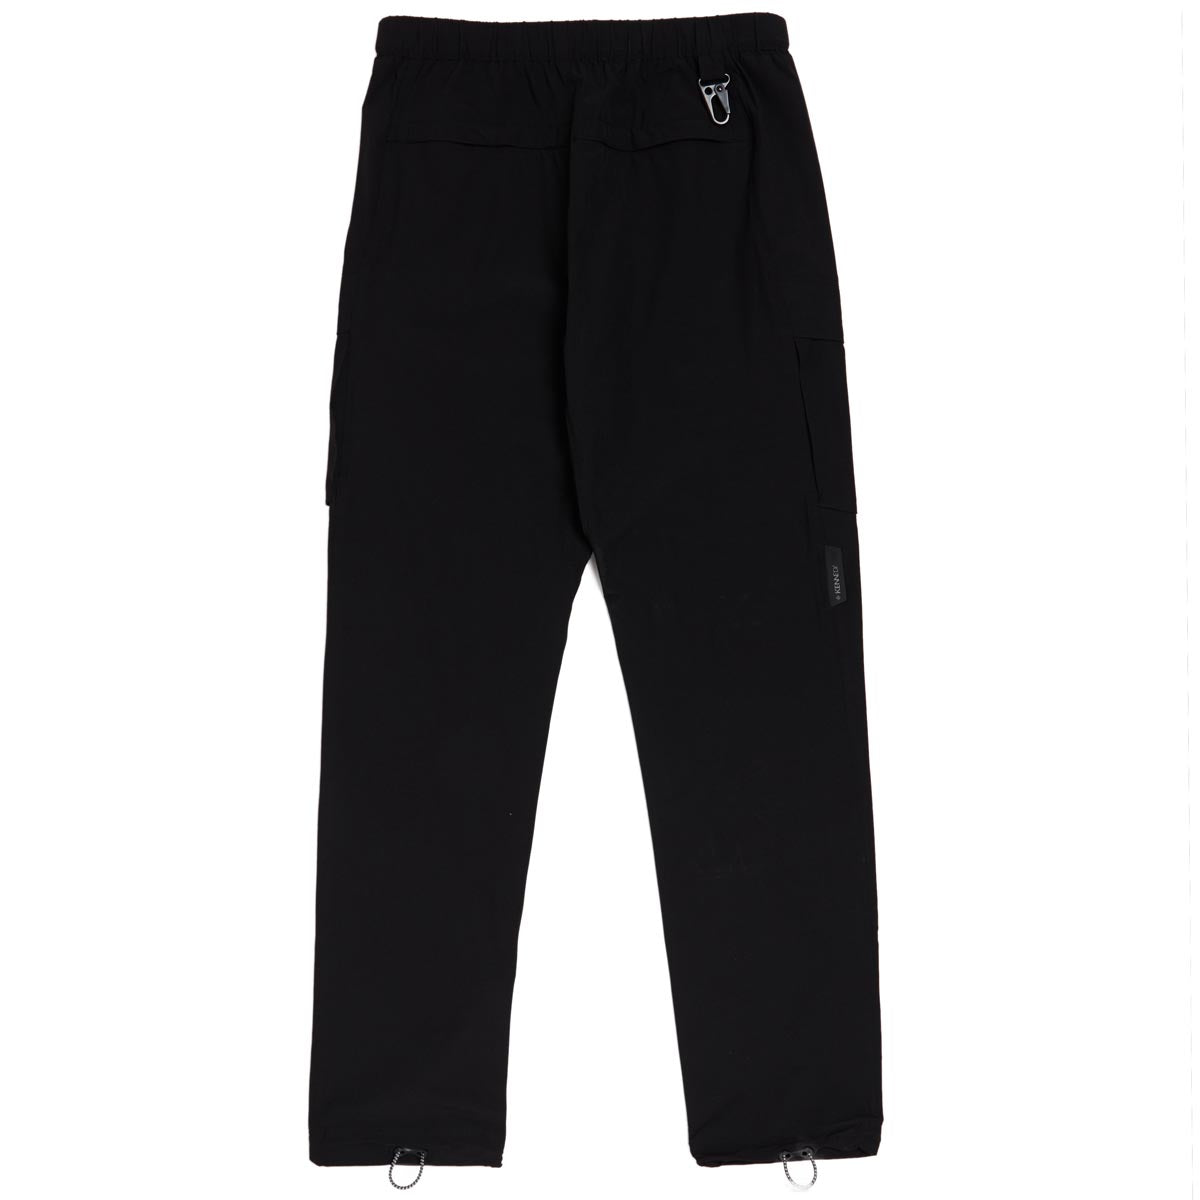 Kennedy The Ascension Cargo Pants - Black image 2